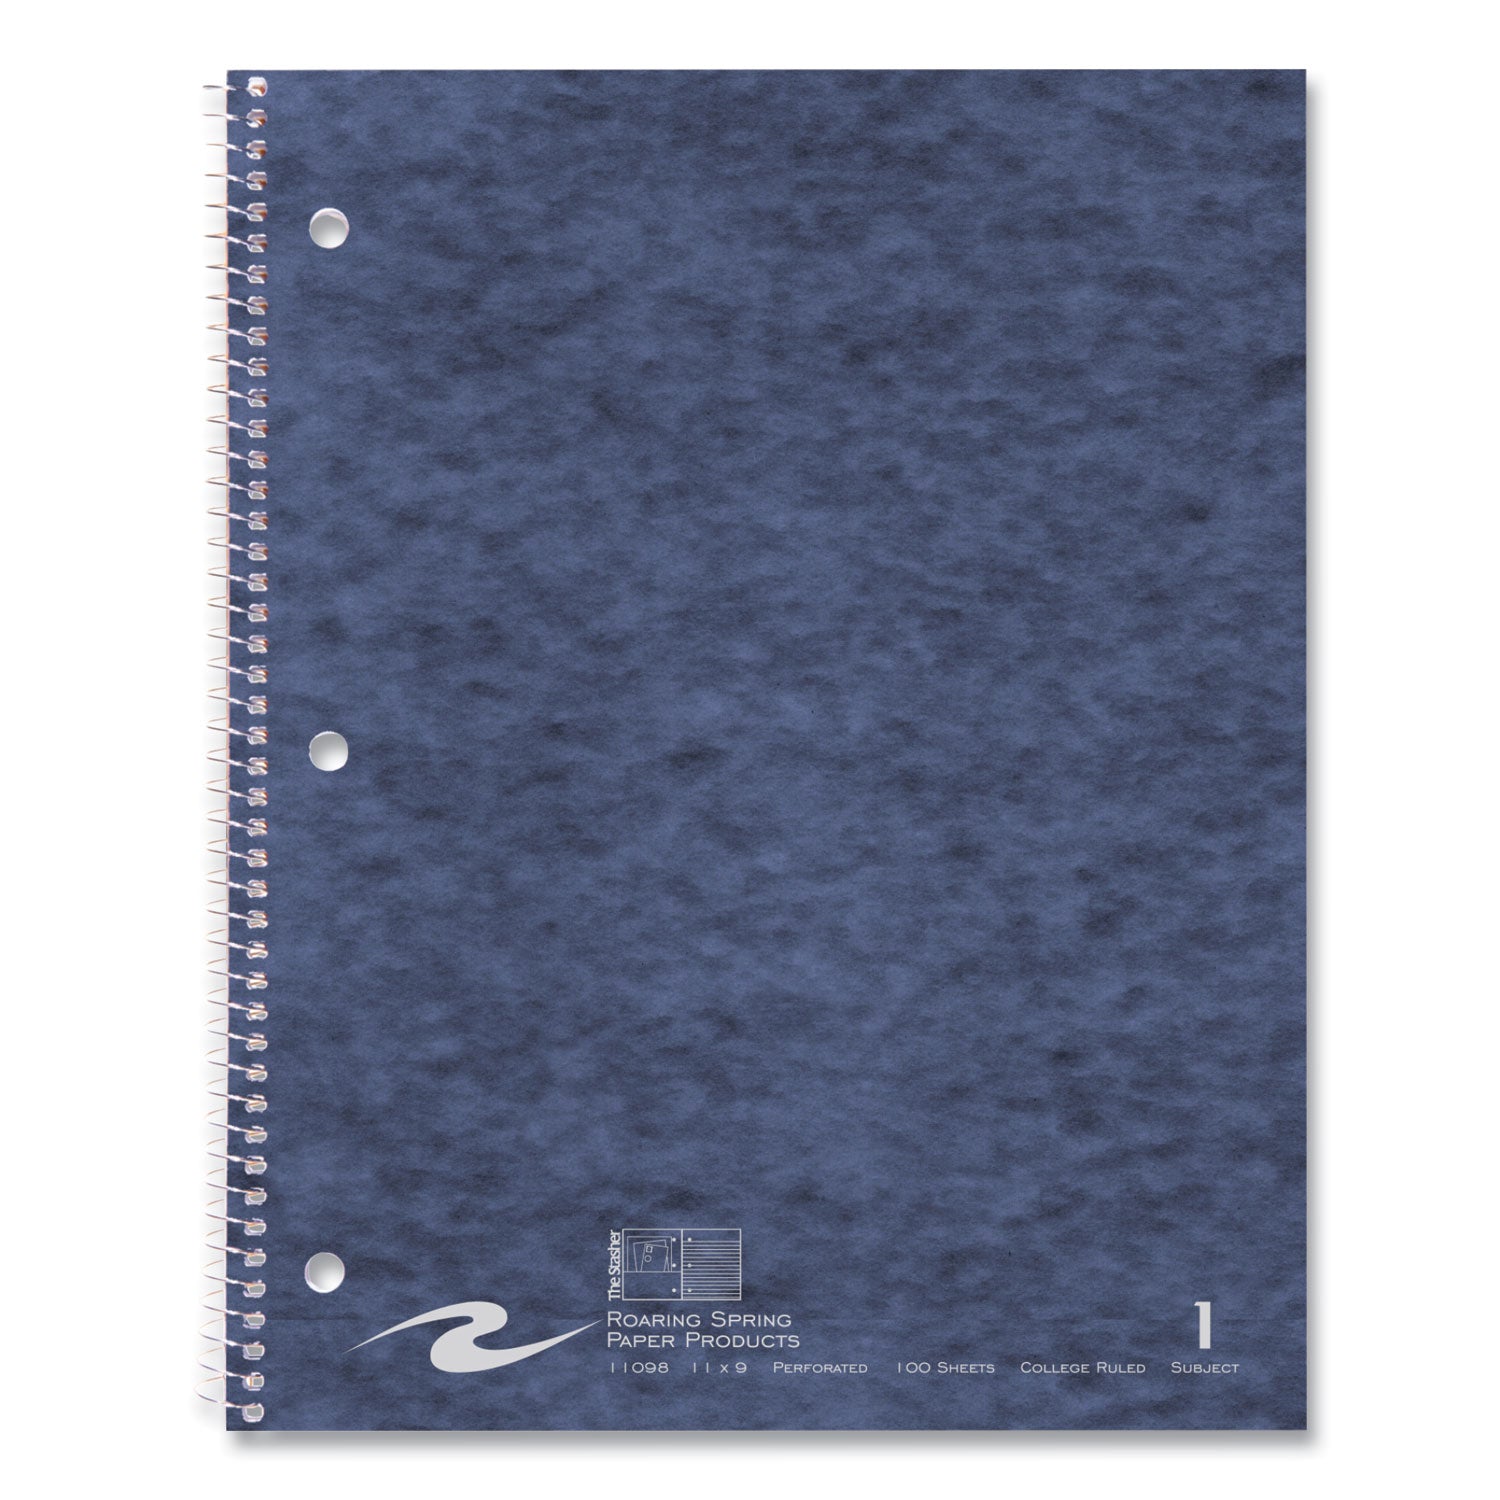 stasher-wirebound-notebooks-1-subject-med-college-rule-randomly-asst-cover-100-11x9-sheets-24-ctships-in-4-6-bus-days_roa11098cs - 3